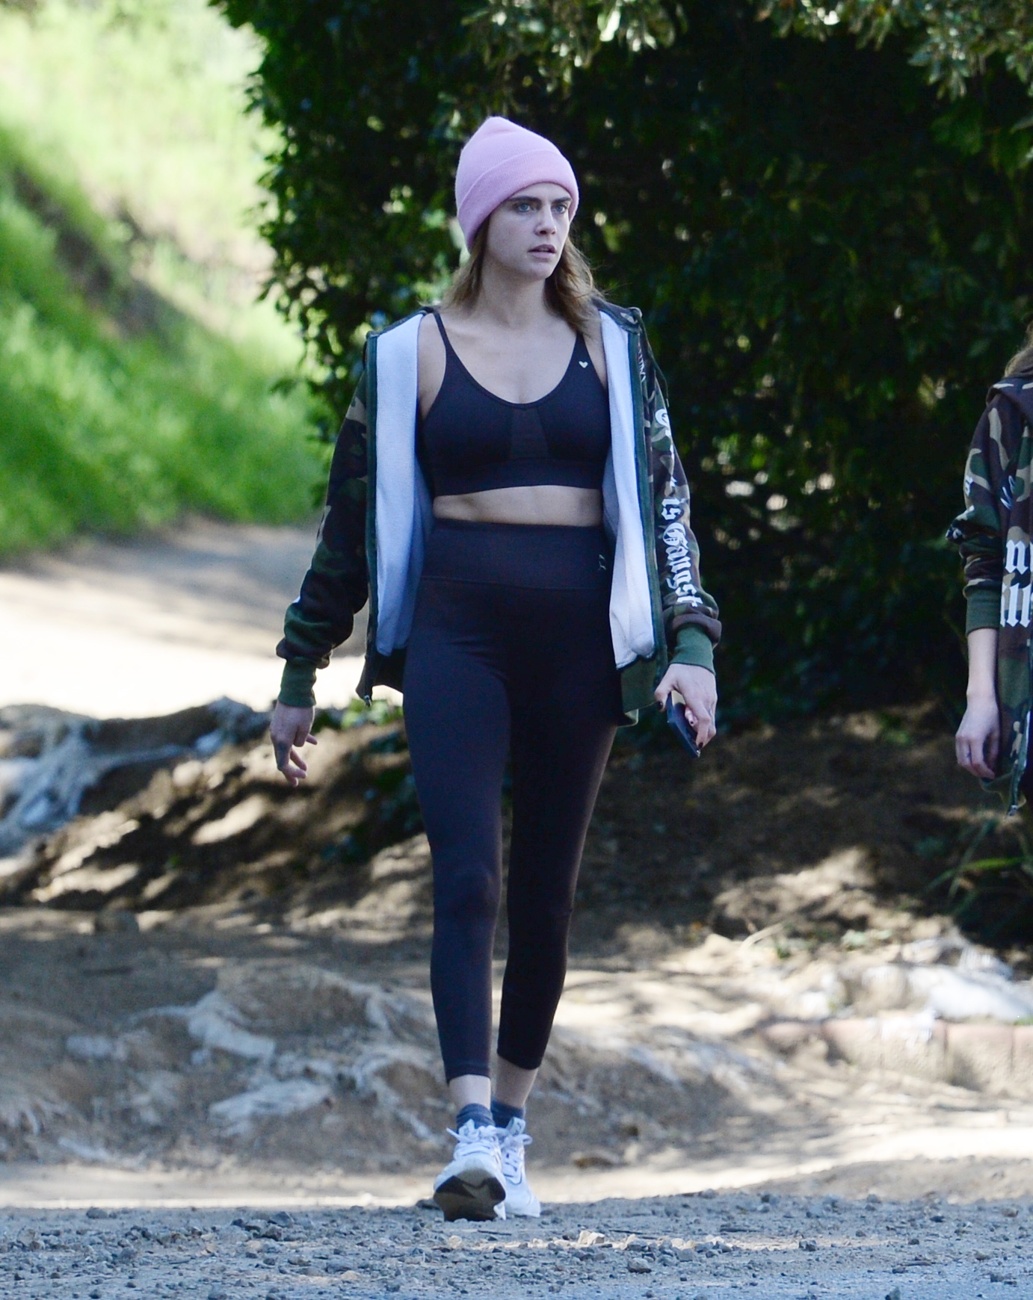 Cara Delevingne strolls through the streets of Los Angeles